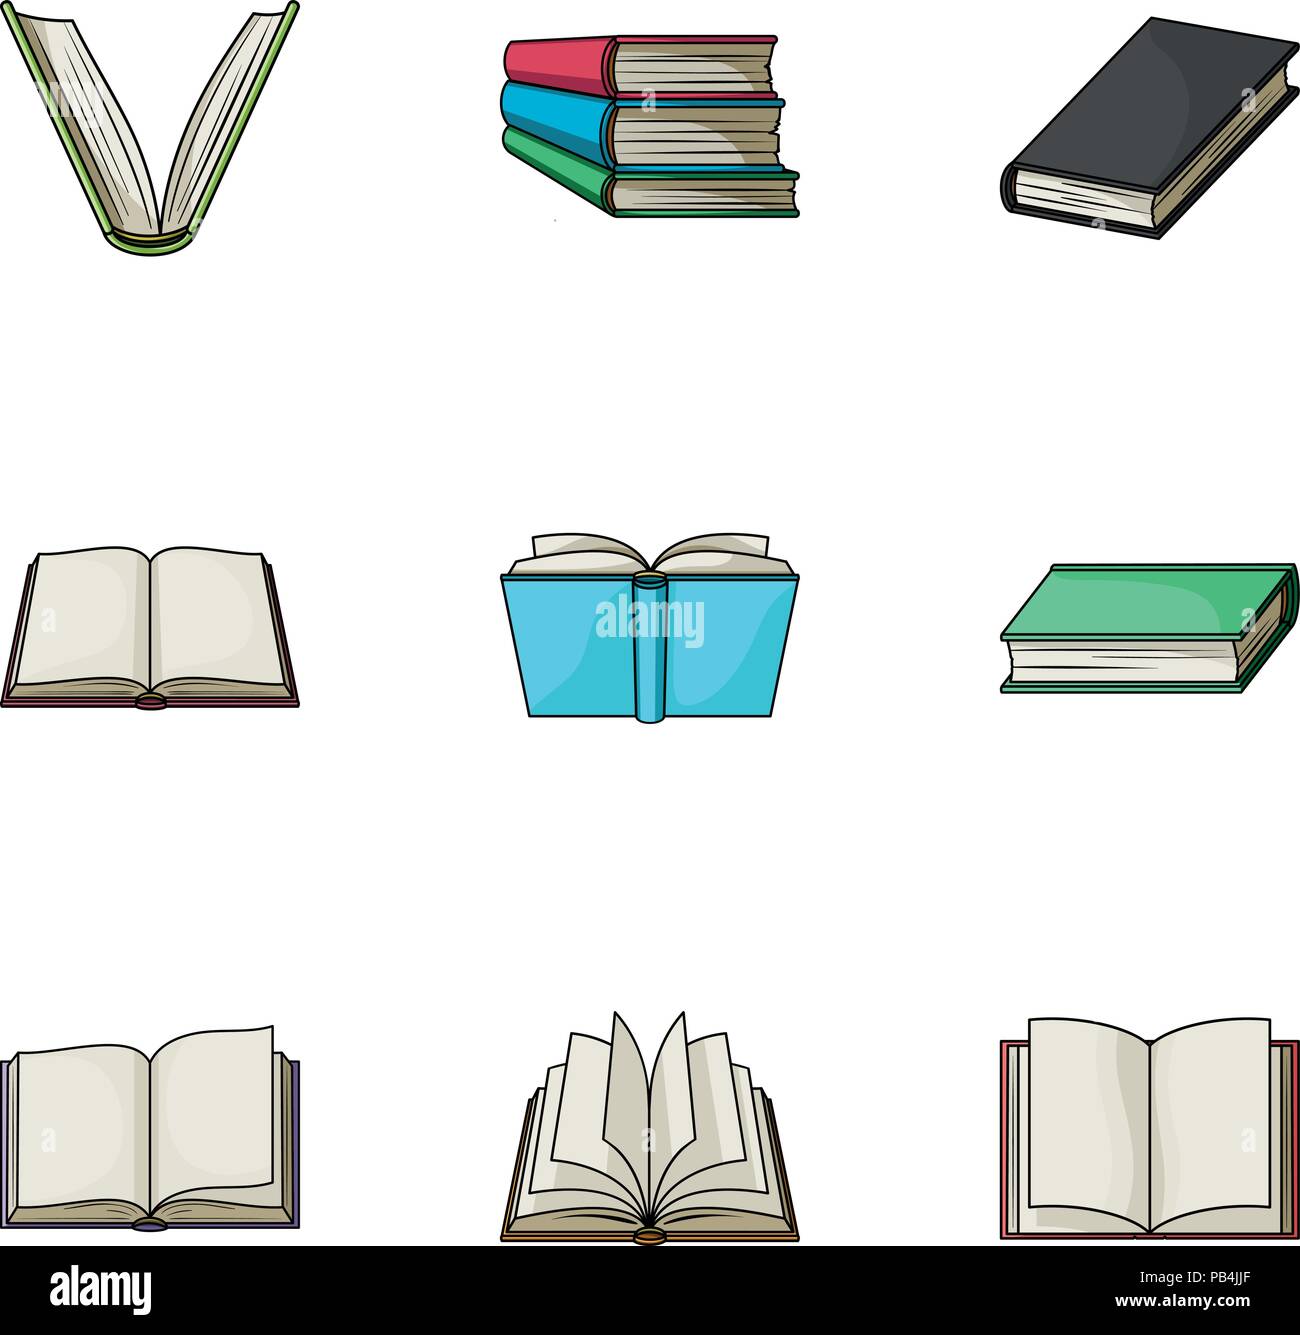 https://c8.alamy.com/comp/PB4JJF/a-set-of-pictures-with-books-books-notebooks-studies-books-icon-in-set-collection-on-cartoon-style-vector-symbol-stock-web-illustration-PB4JJF.jpg